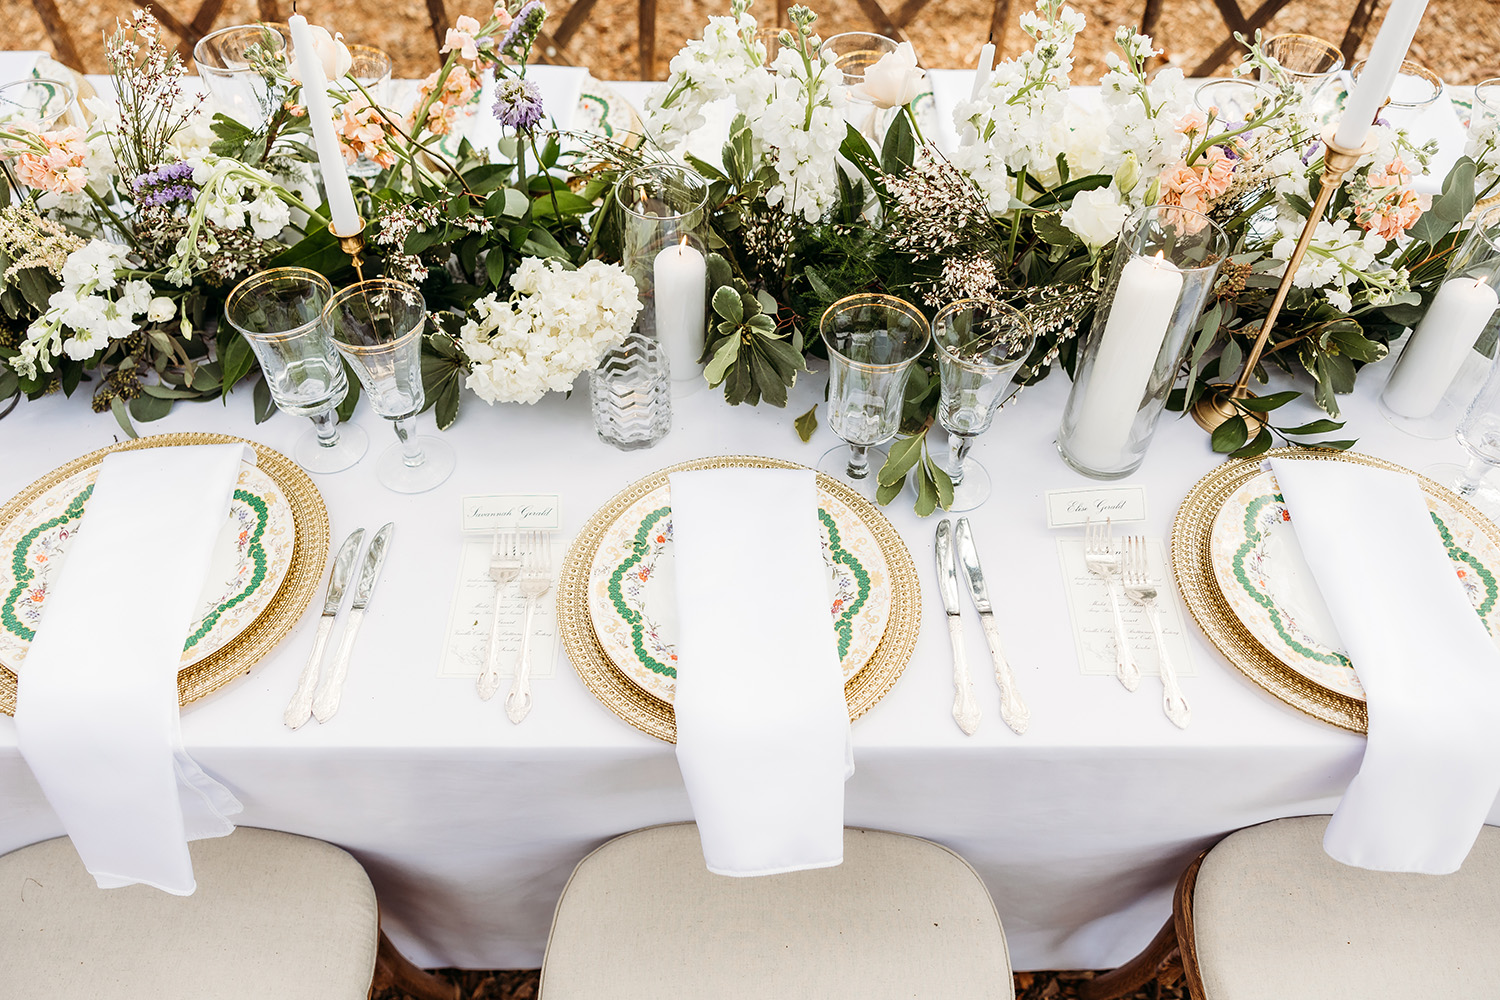 Arranged table with florals in the center.